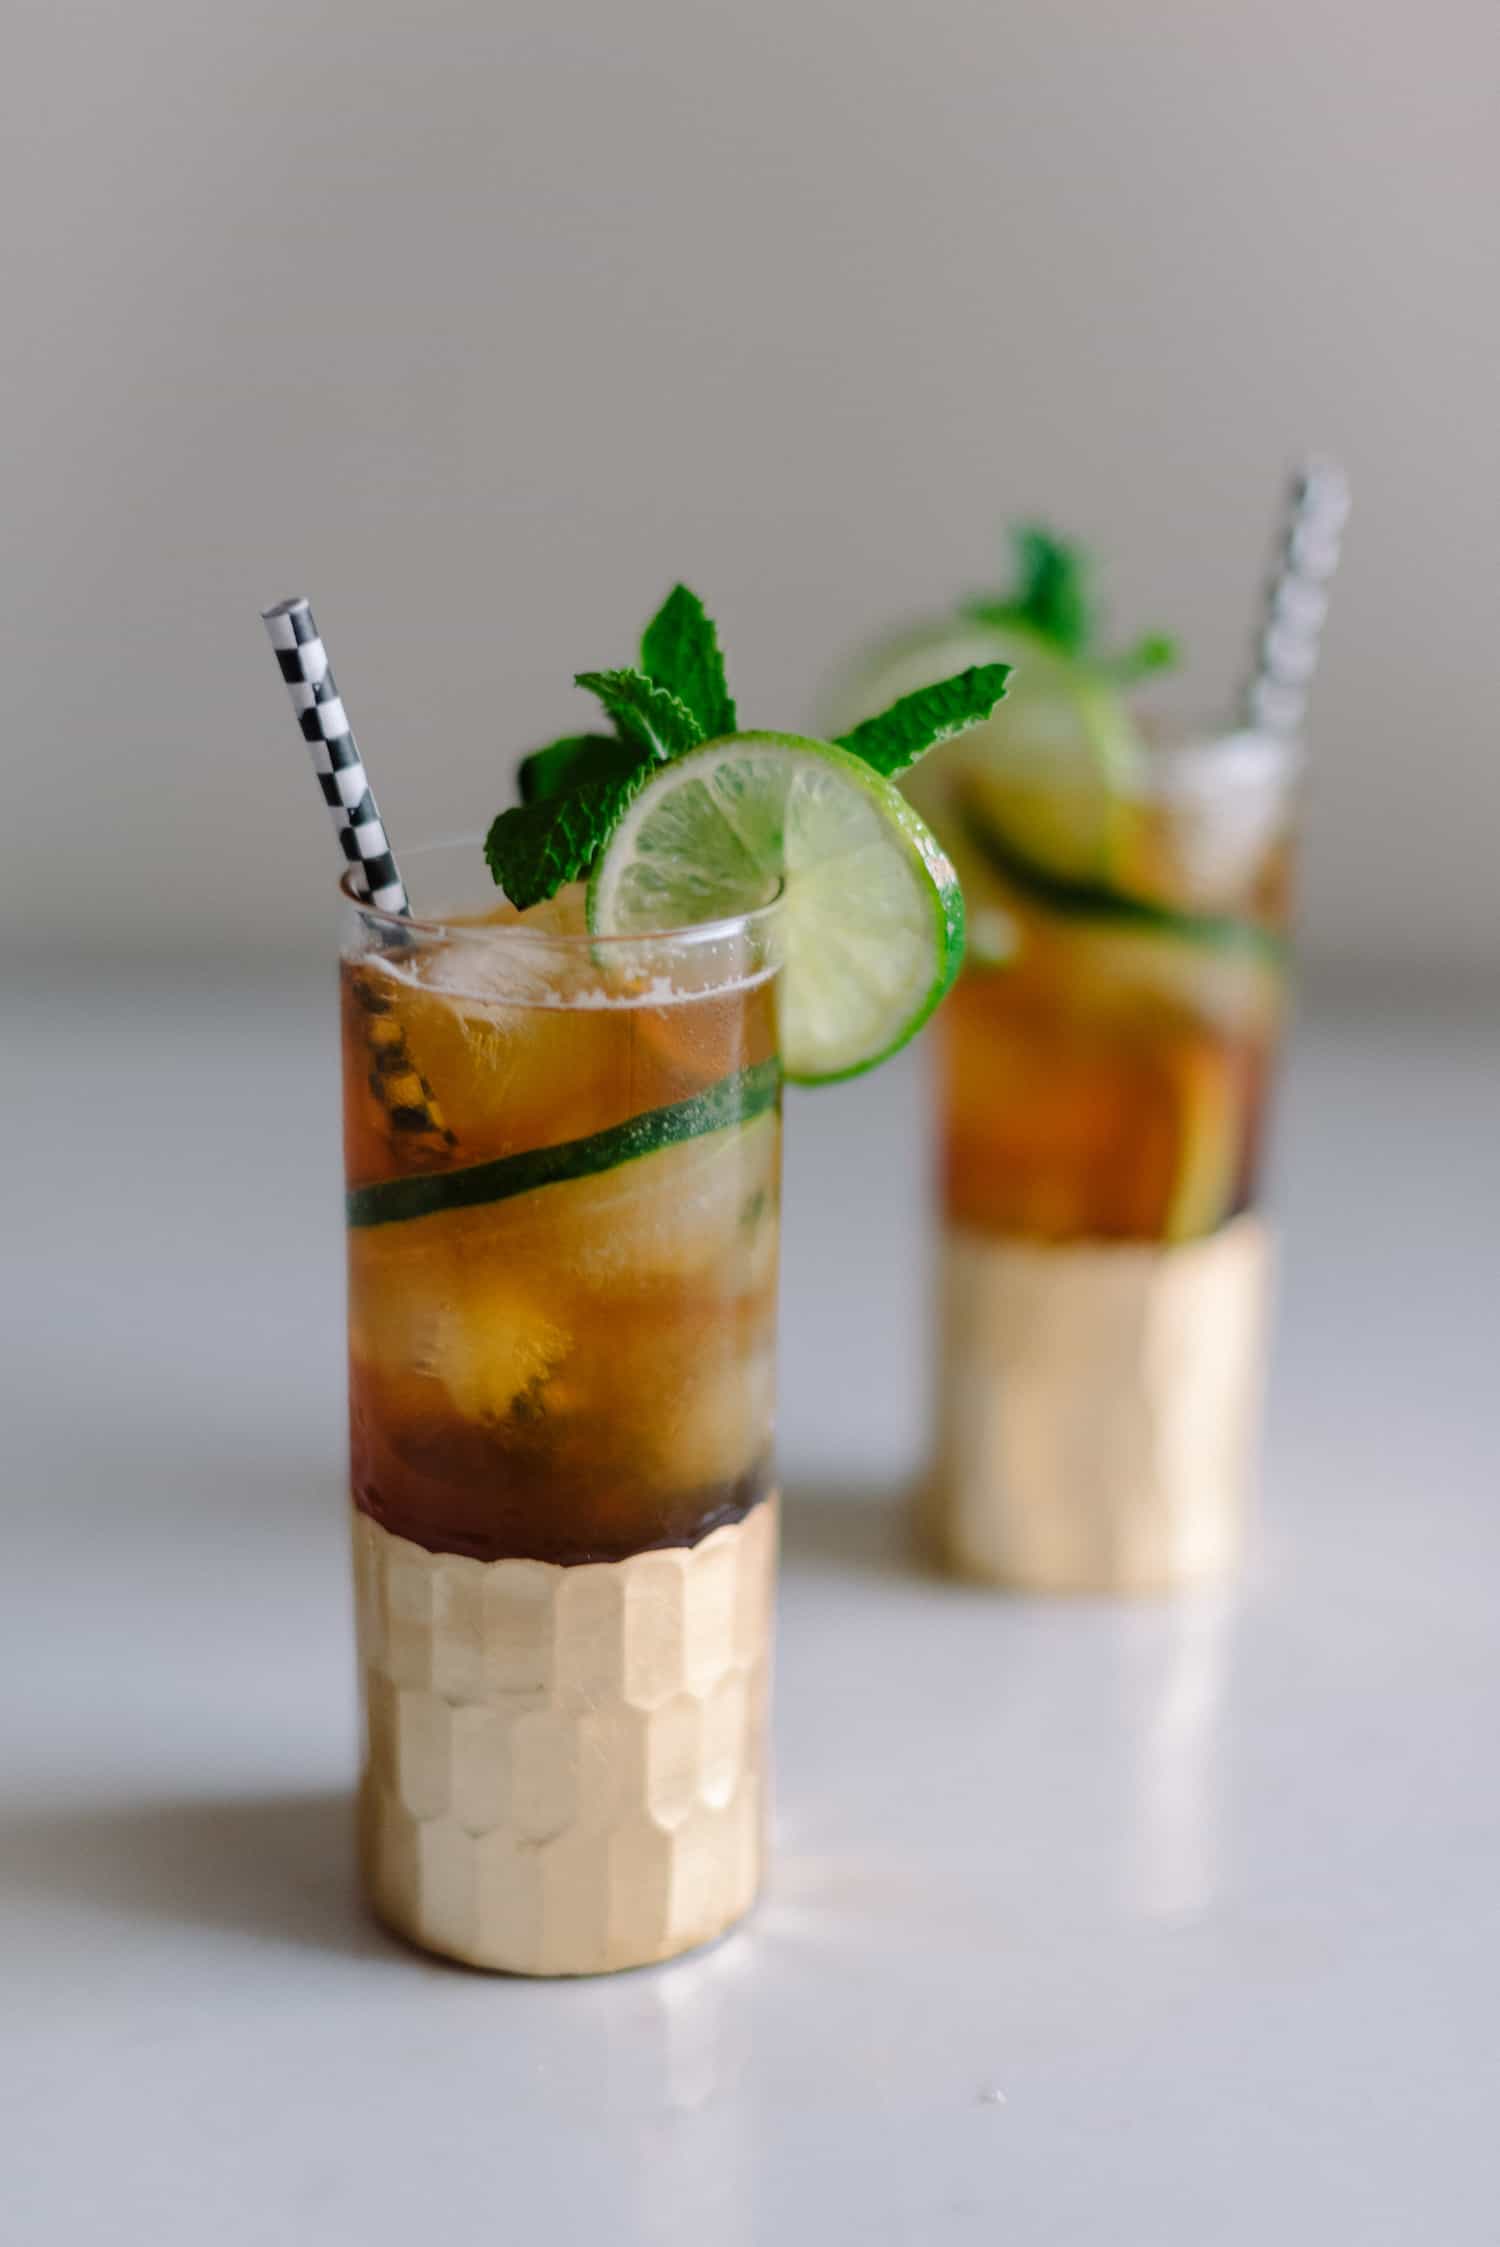 The Pimm's Cup